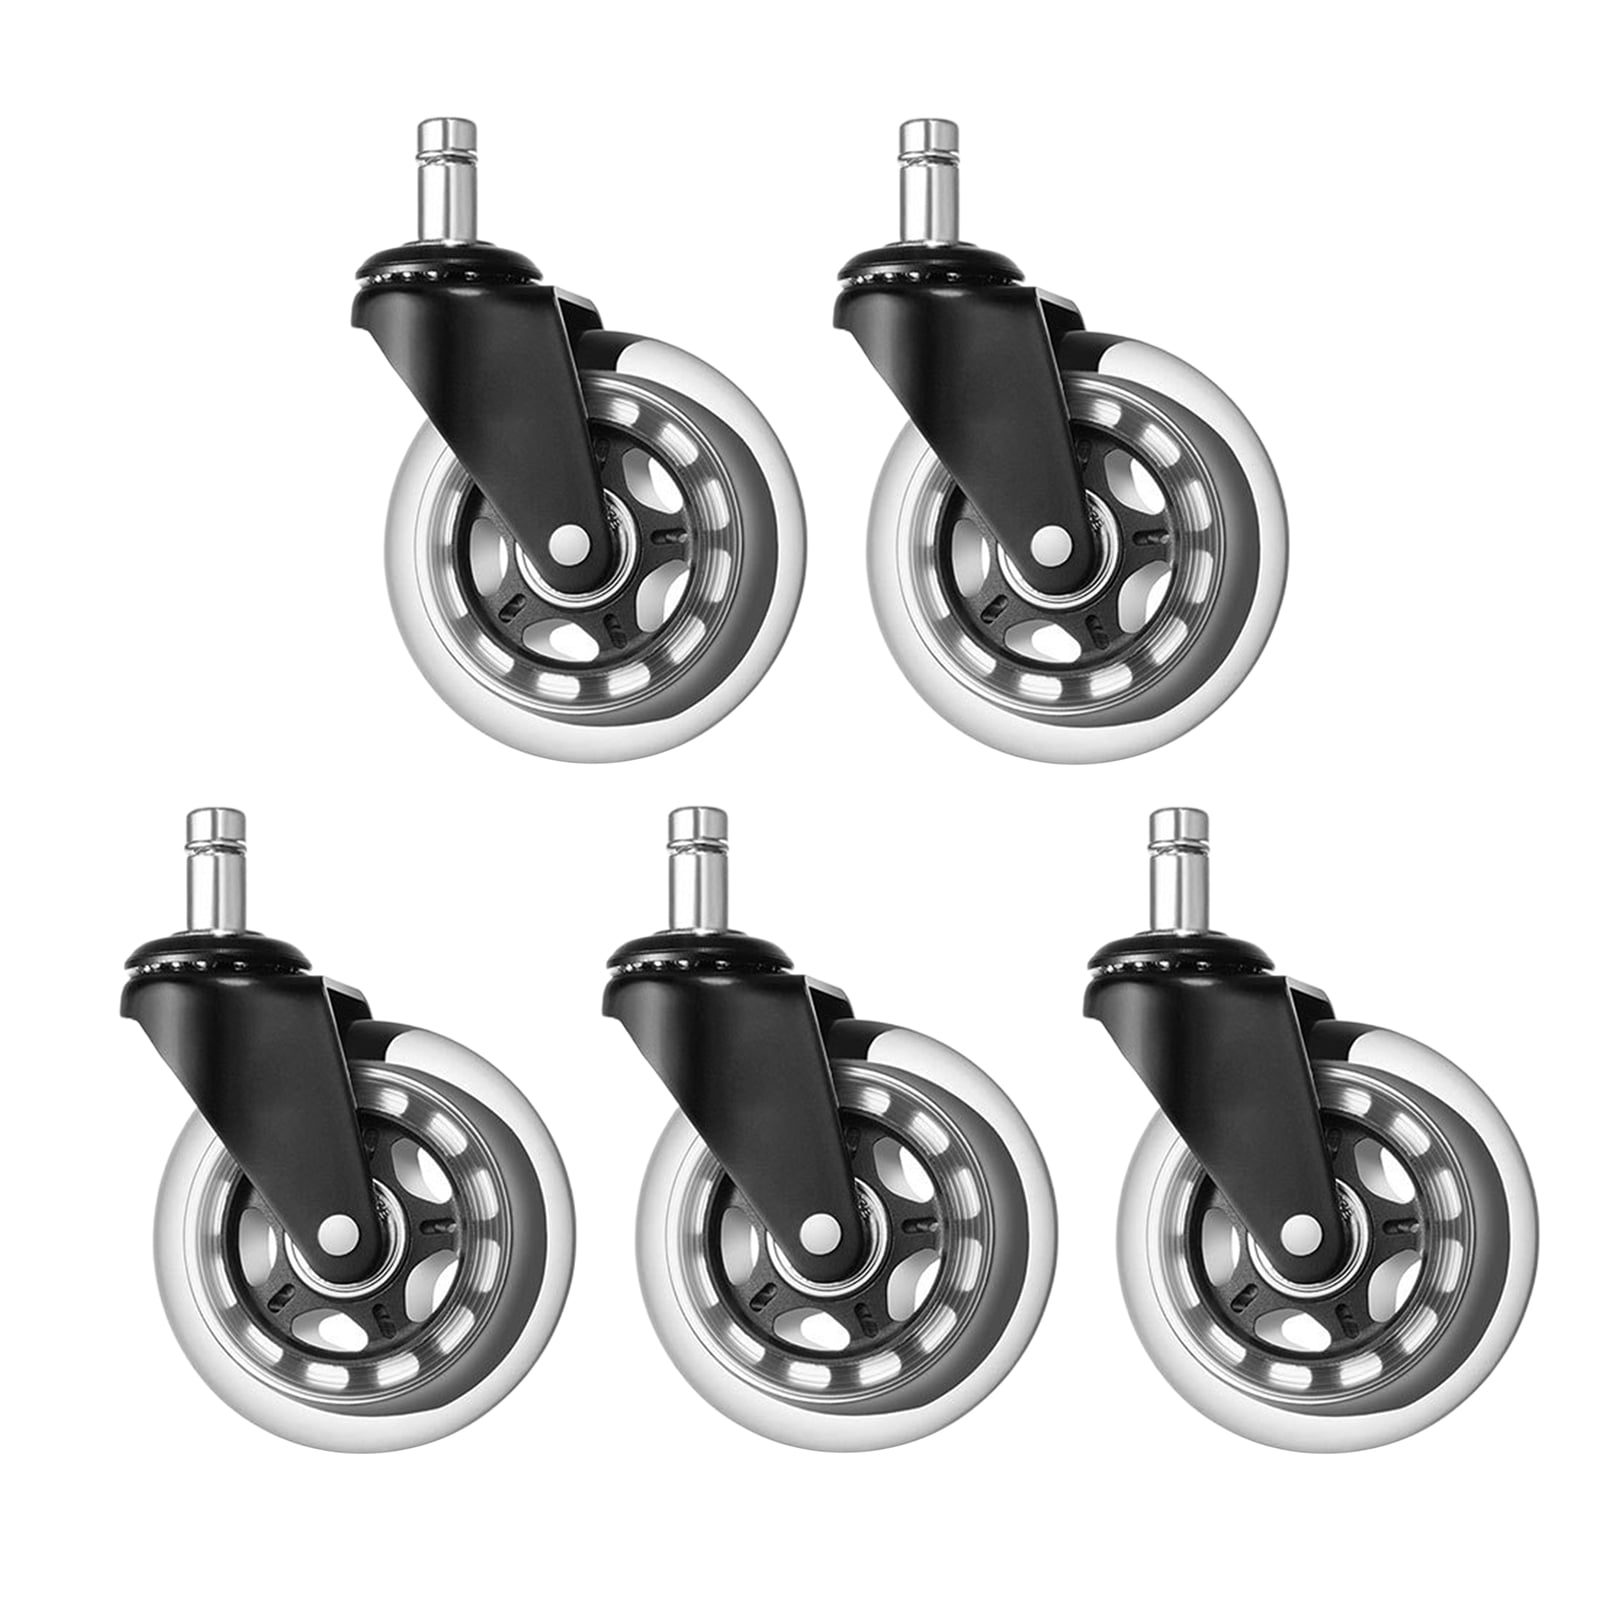 5 Pcs 3" Office Chair Caster Wheels with Brake Replacement Universal Heavy Duty 